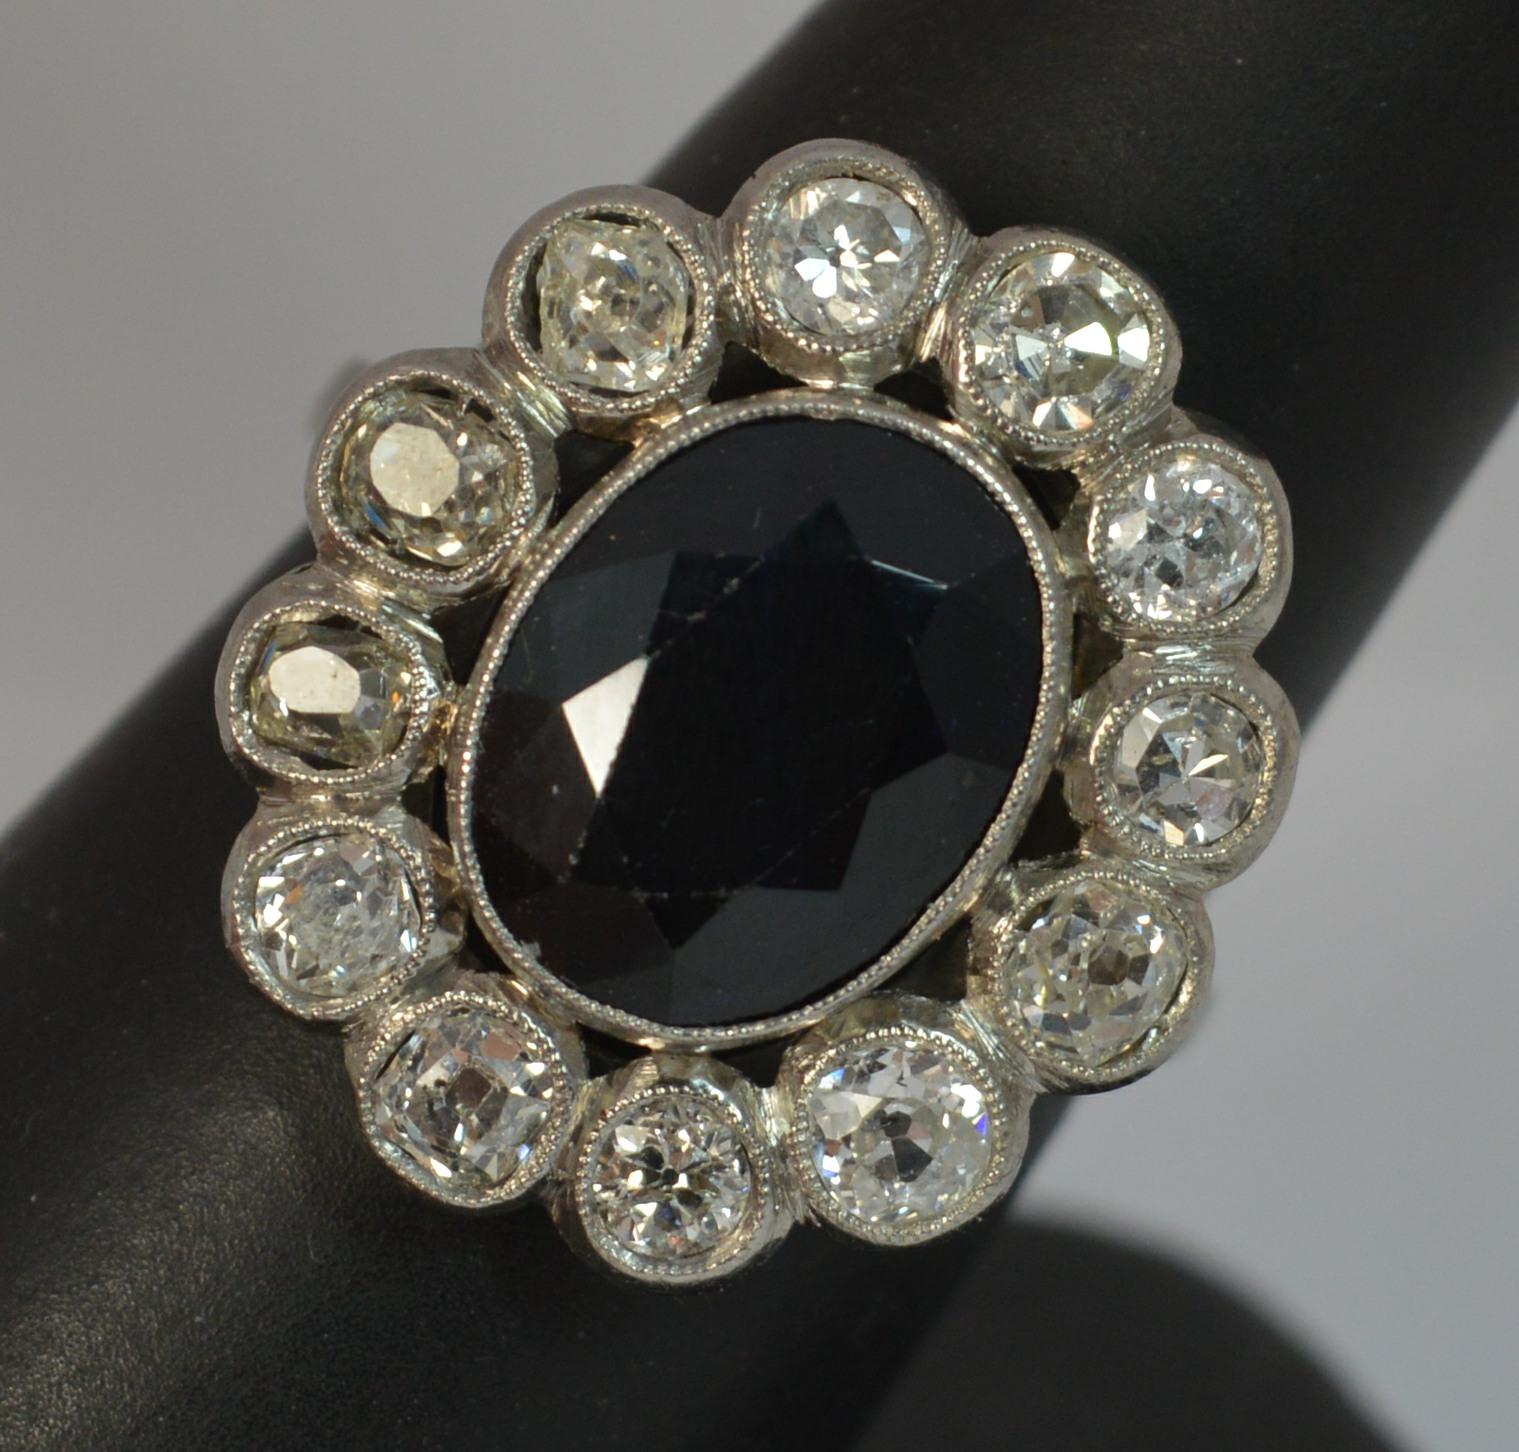 A stunning antique cluster ring.
Ring Size; R UK, 8 3/4 US
A French made example in solid platinum throughout.

Set with a large oval cut natural dark sapphire to the centre, 9.7mm x 12.5mm. 

Surrounding are twelve natural old European cut